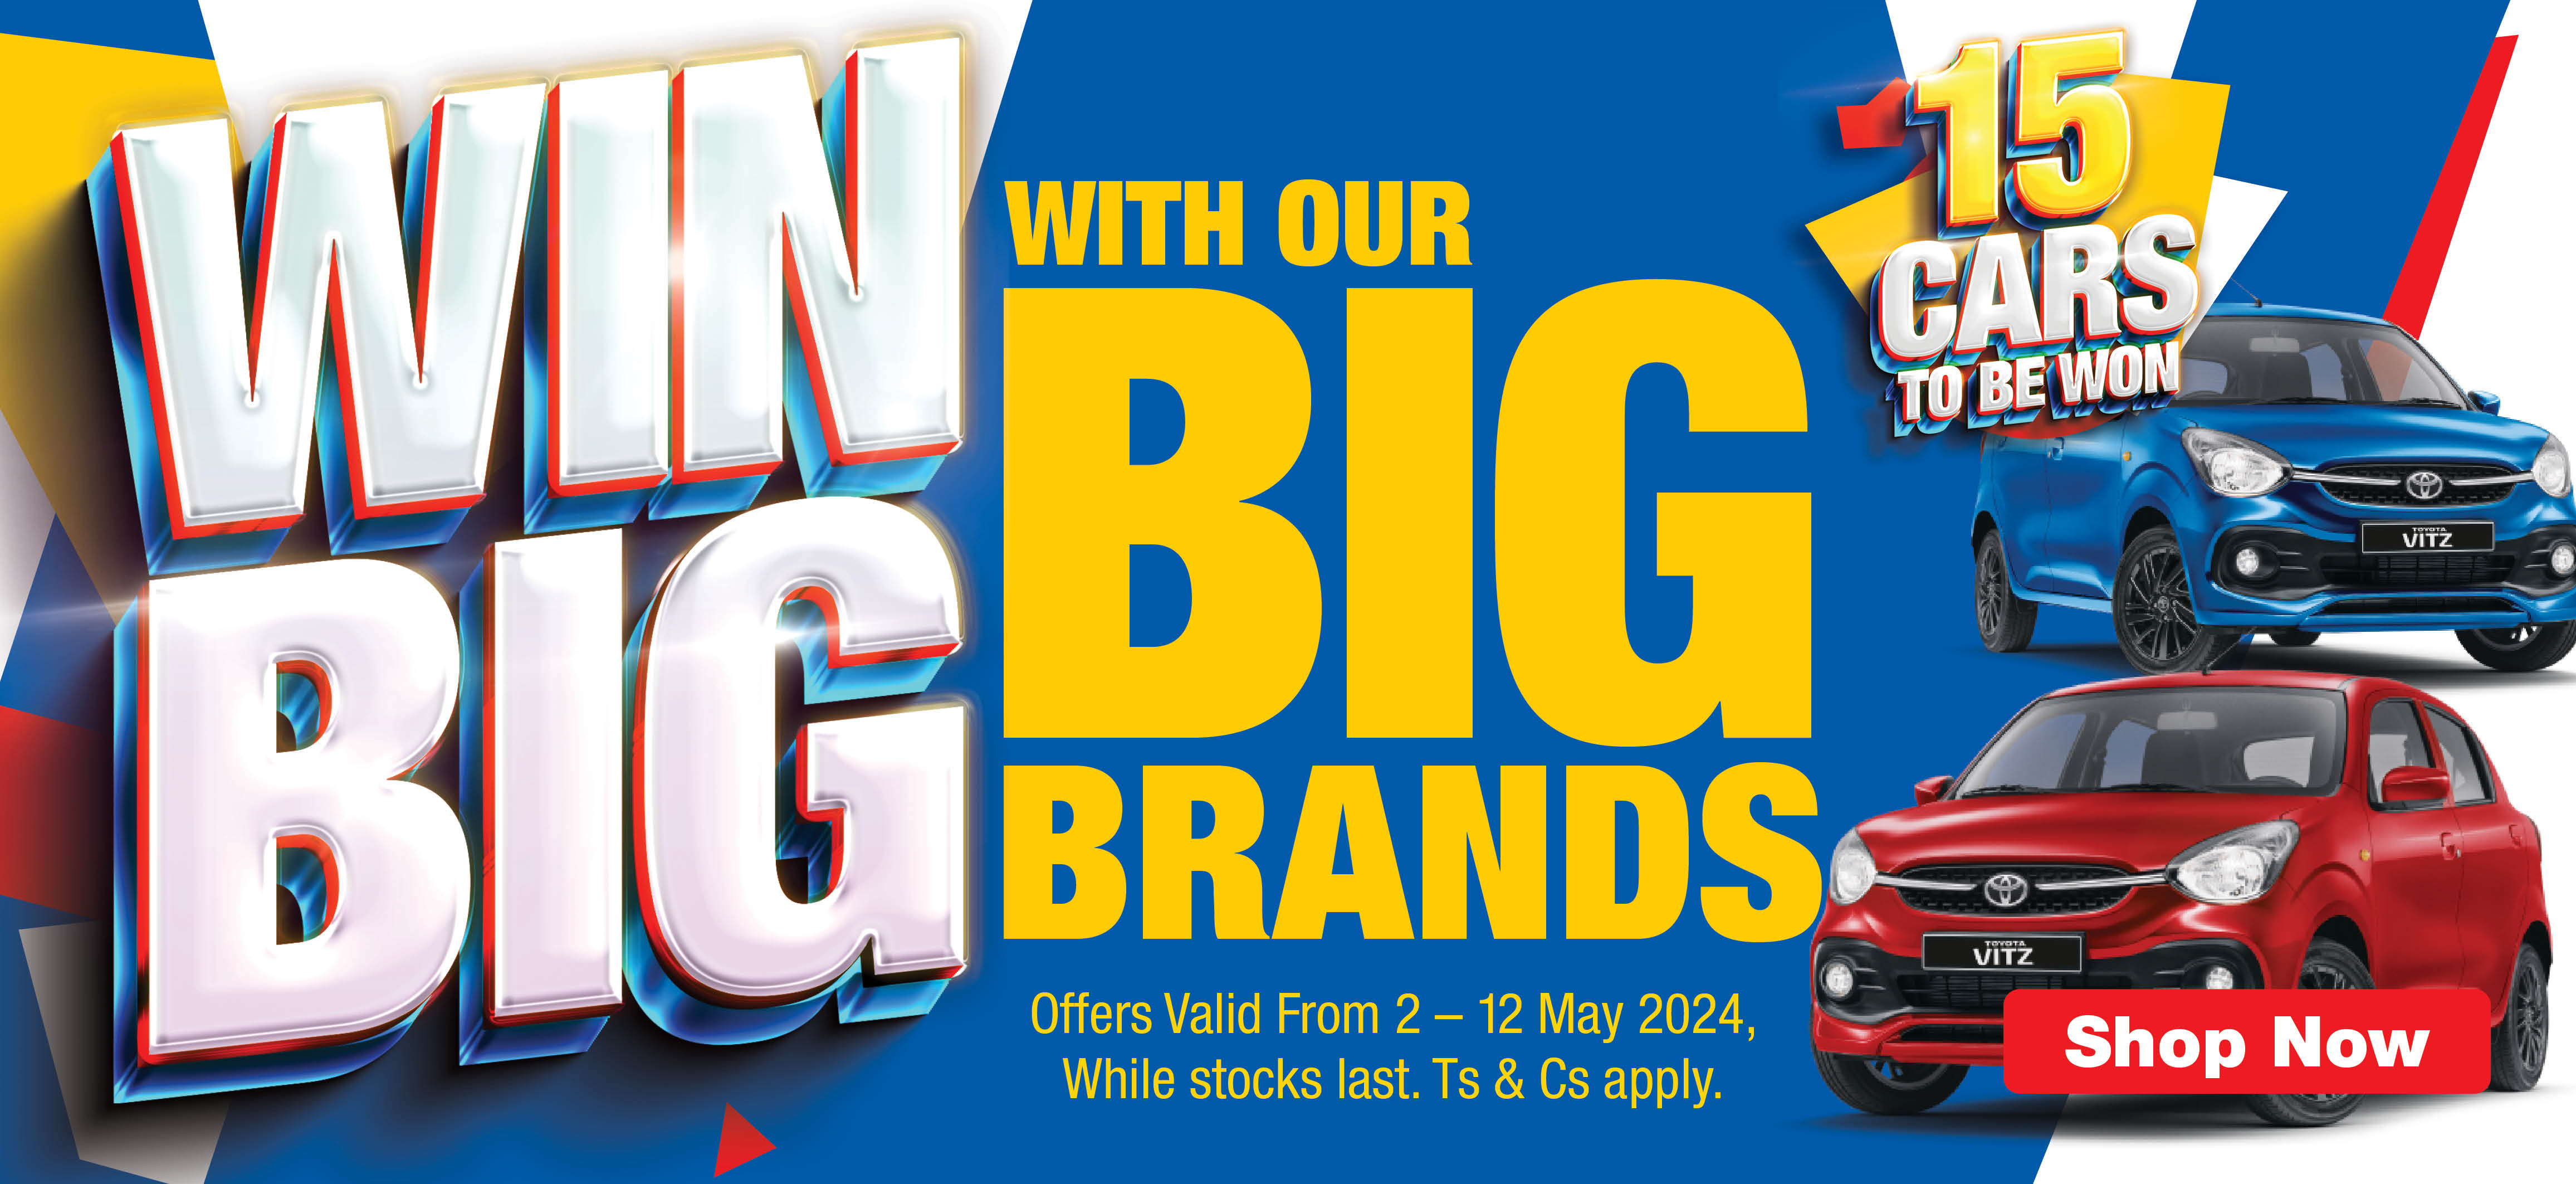 WIN BIG WITH OUR BIG BRANDS — 15 CARS TO BE WON Offers valid from 2 – 12 May 2024. While stocks last. Ts & Cs apply